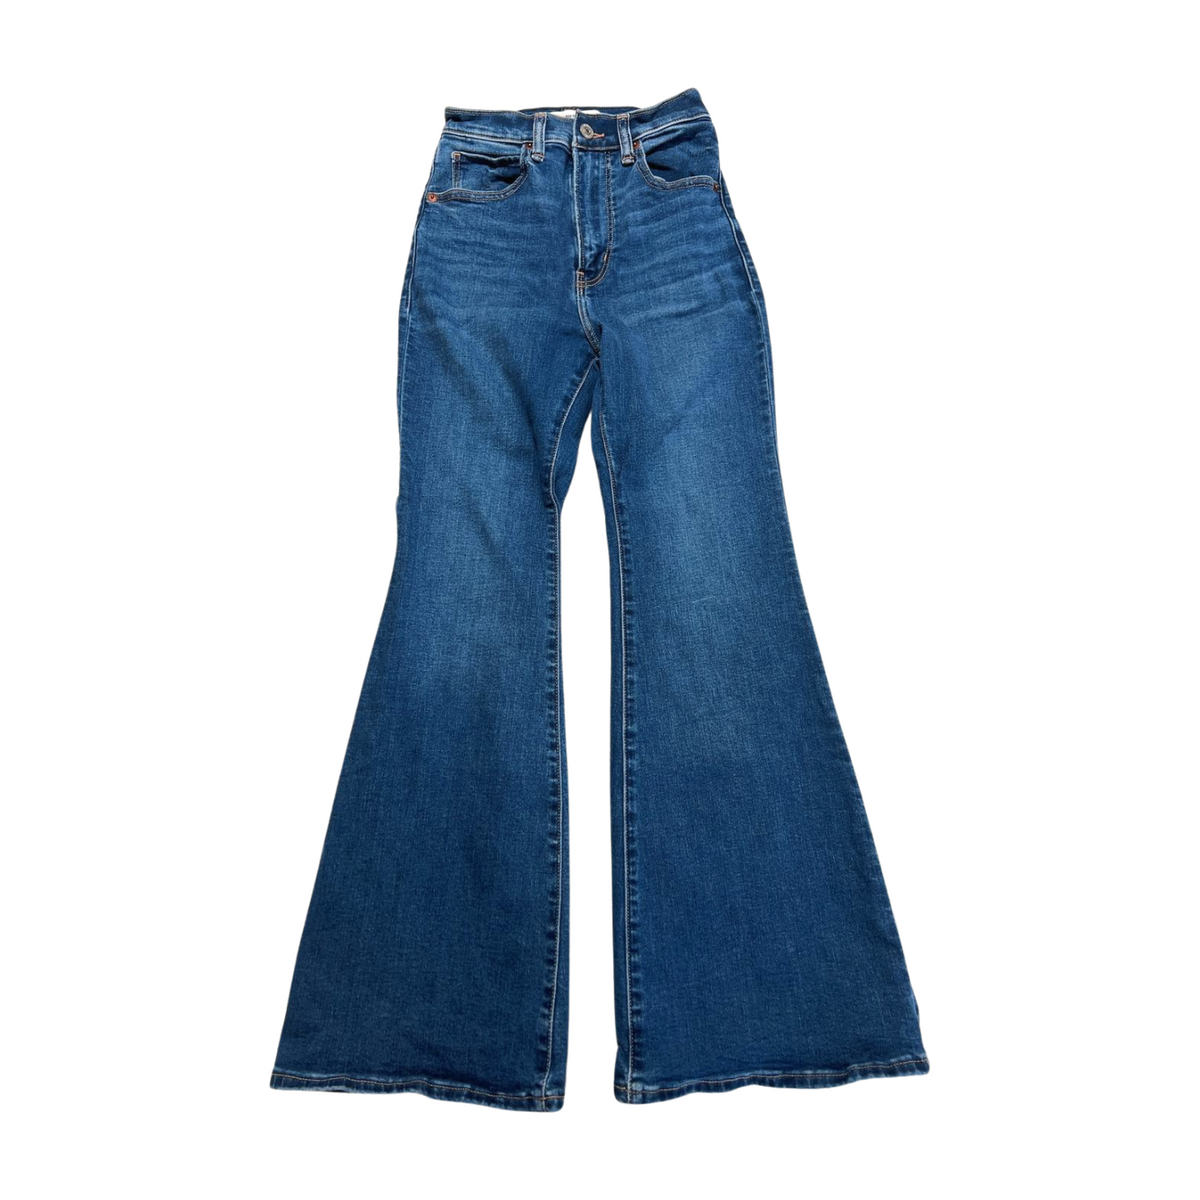 Abercrombie & Fitch- "Flare Ultra High Rise" Jeans